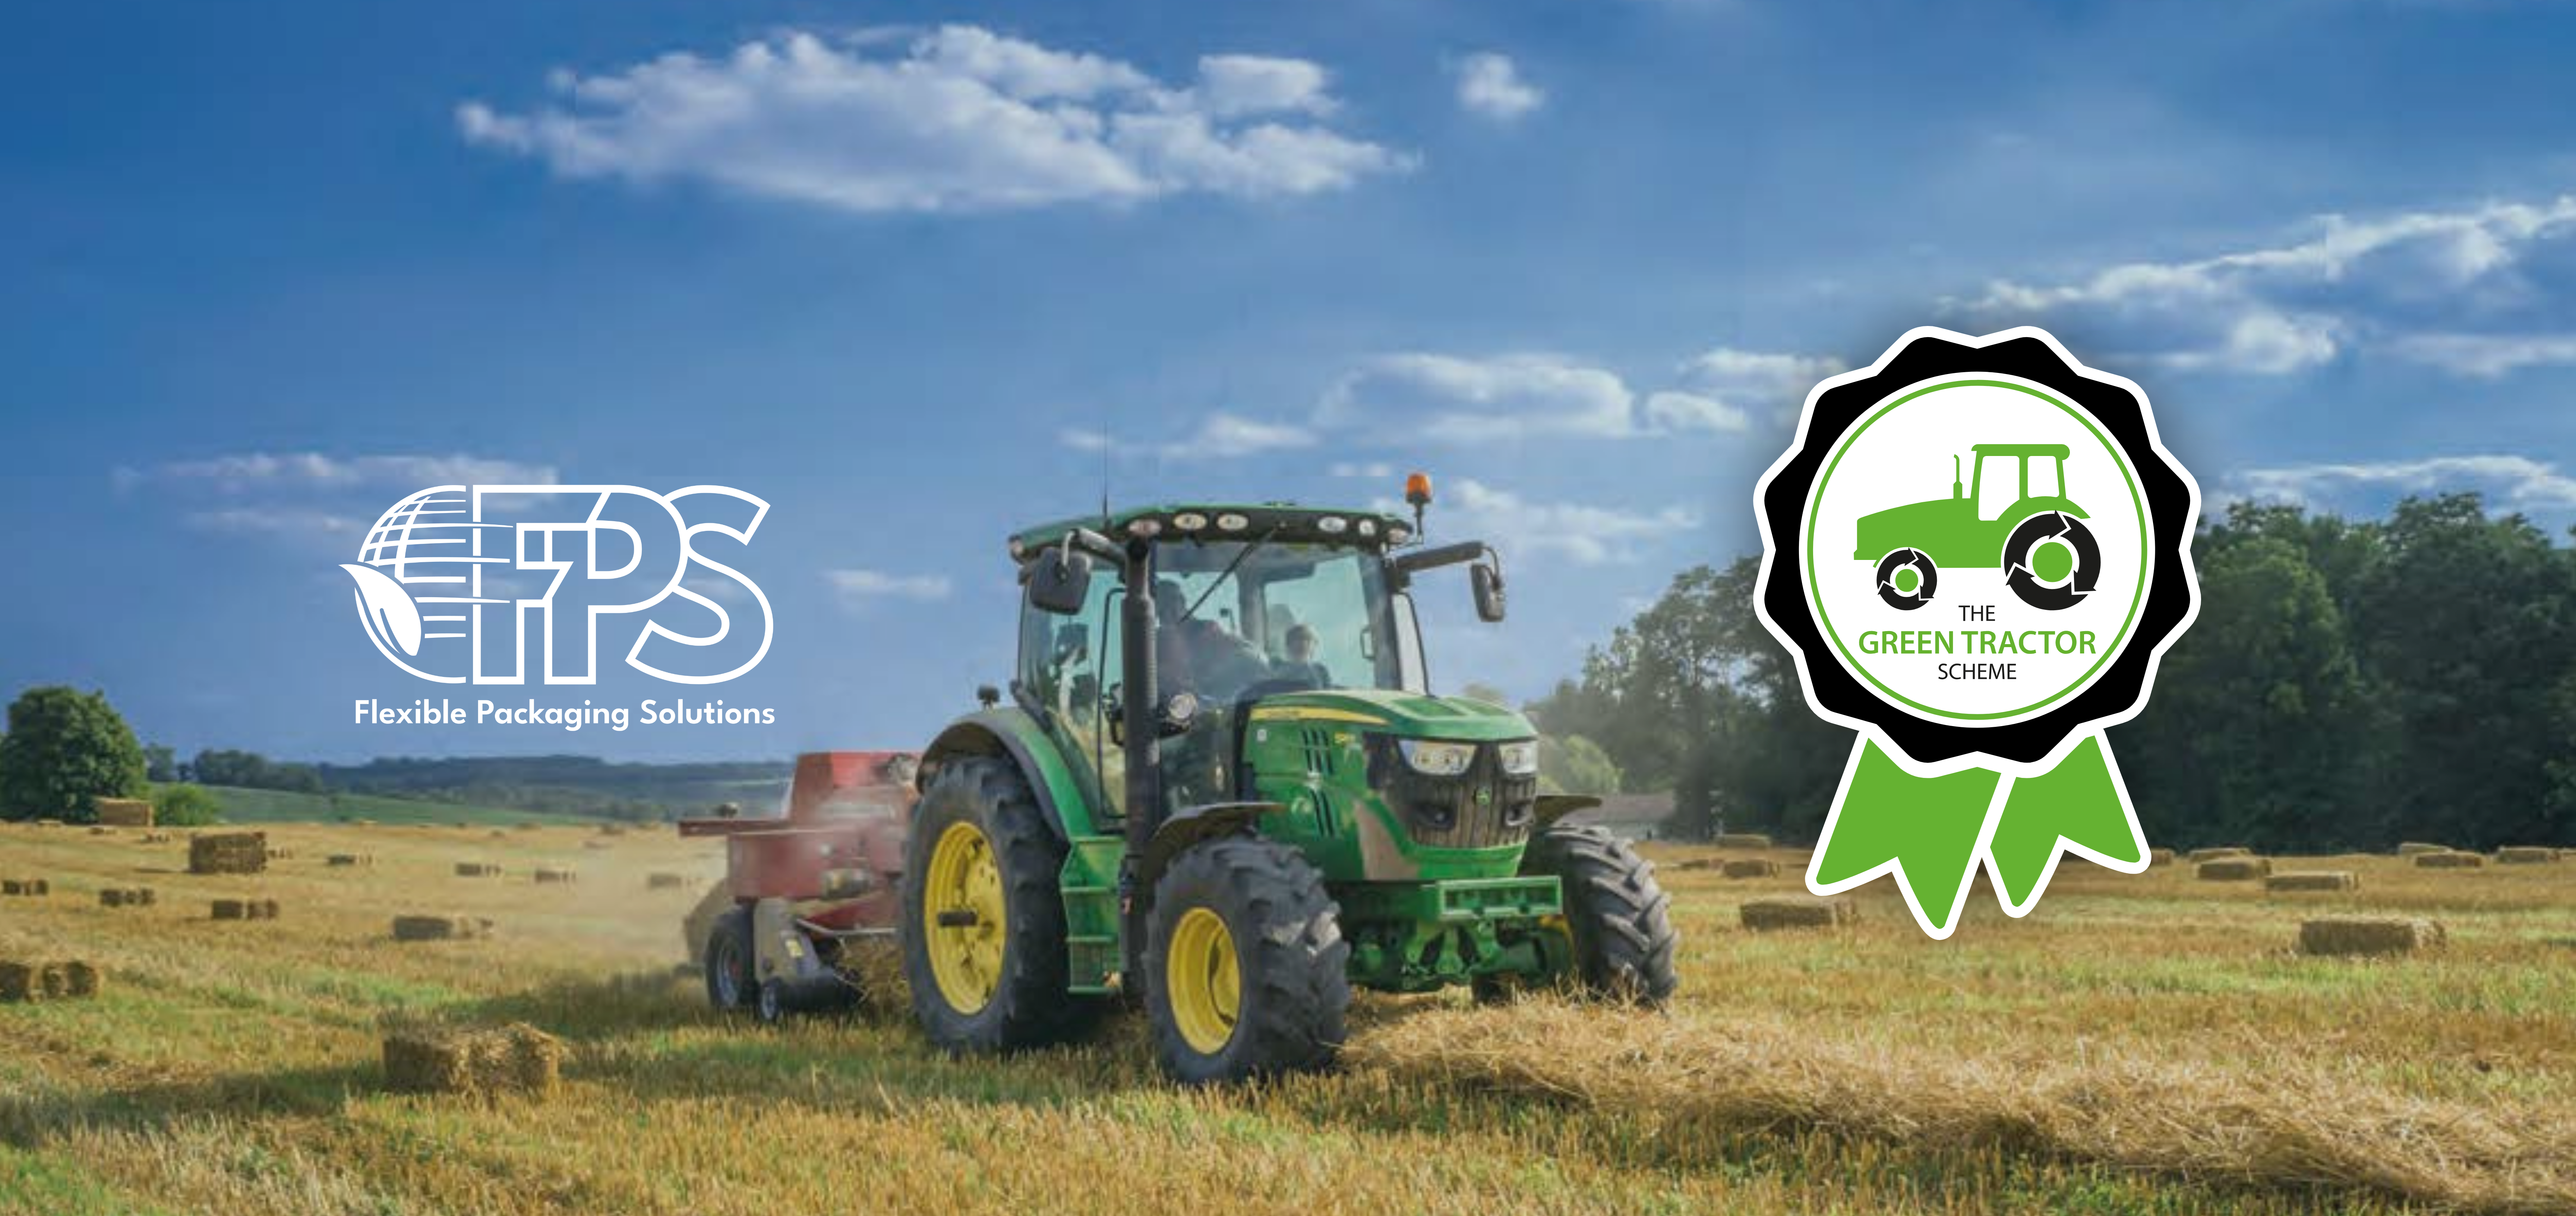 Image promoting sustainable agriculture practices with a green tractor image.